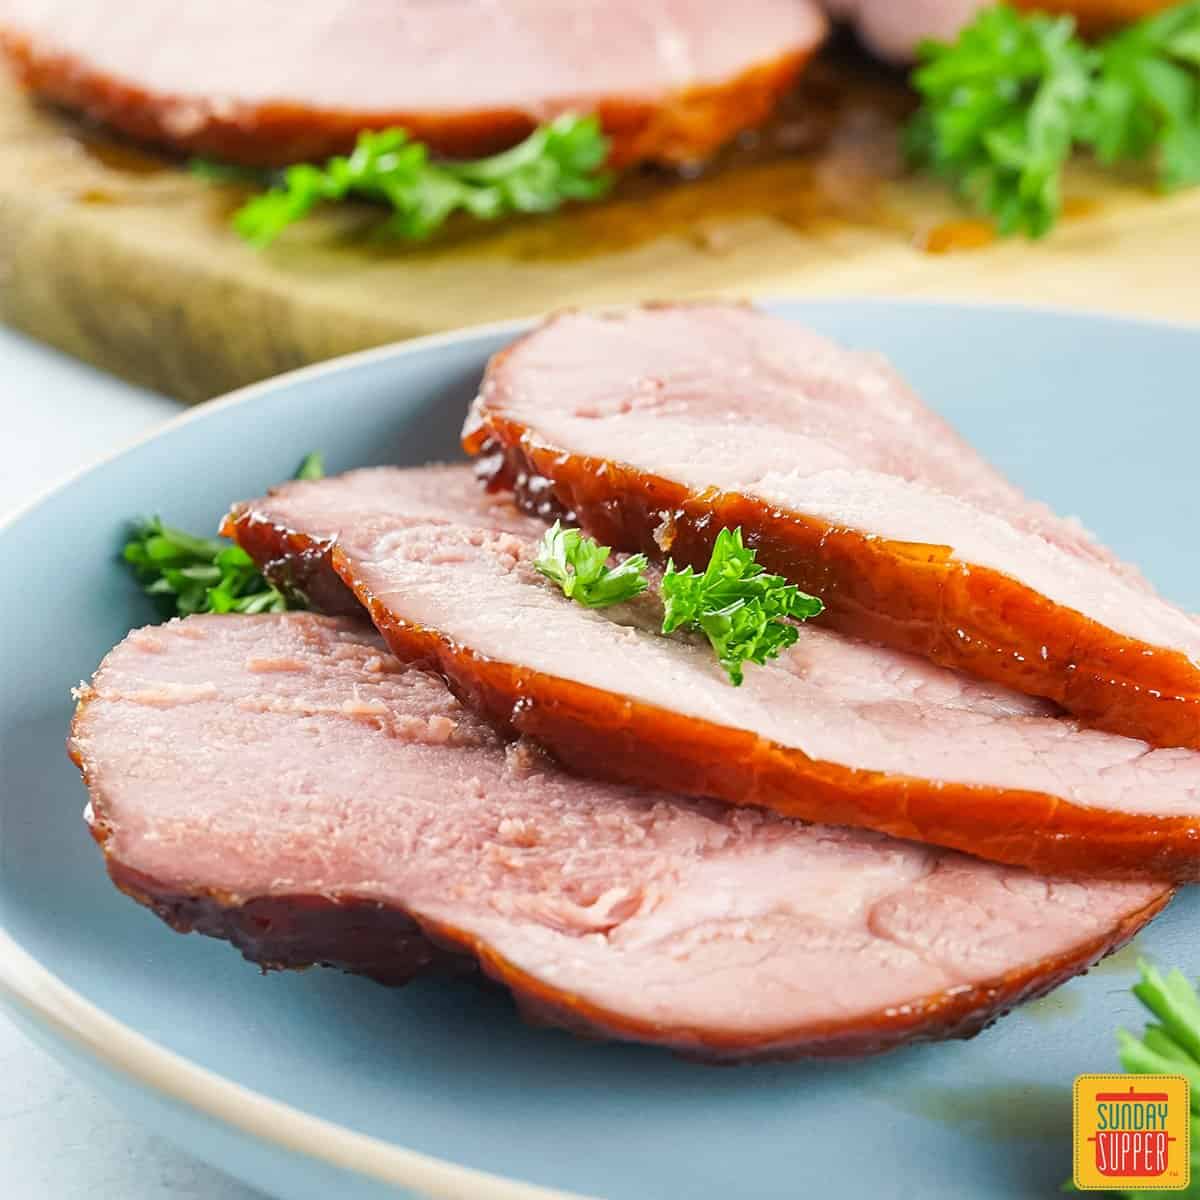 Slices of smoked ham on a plate